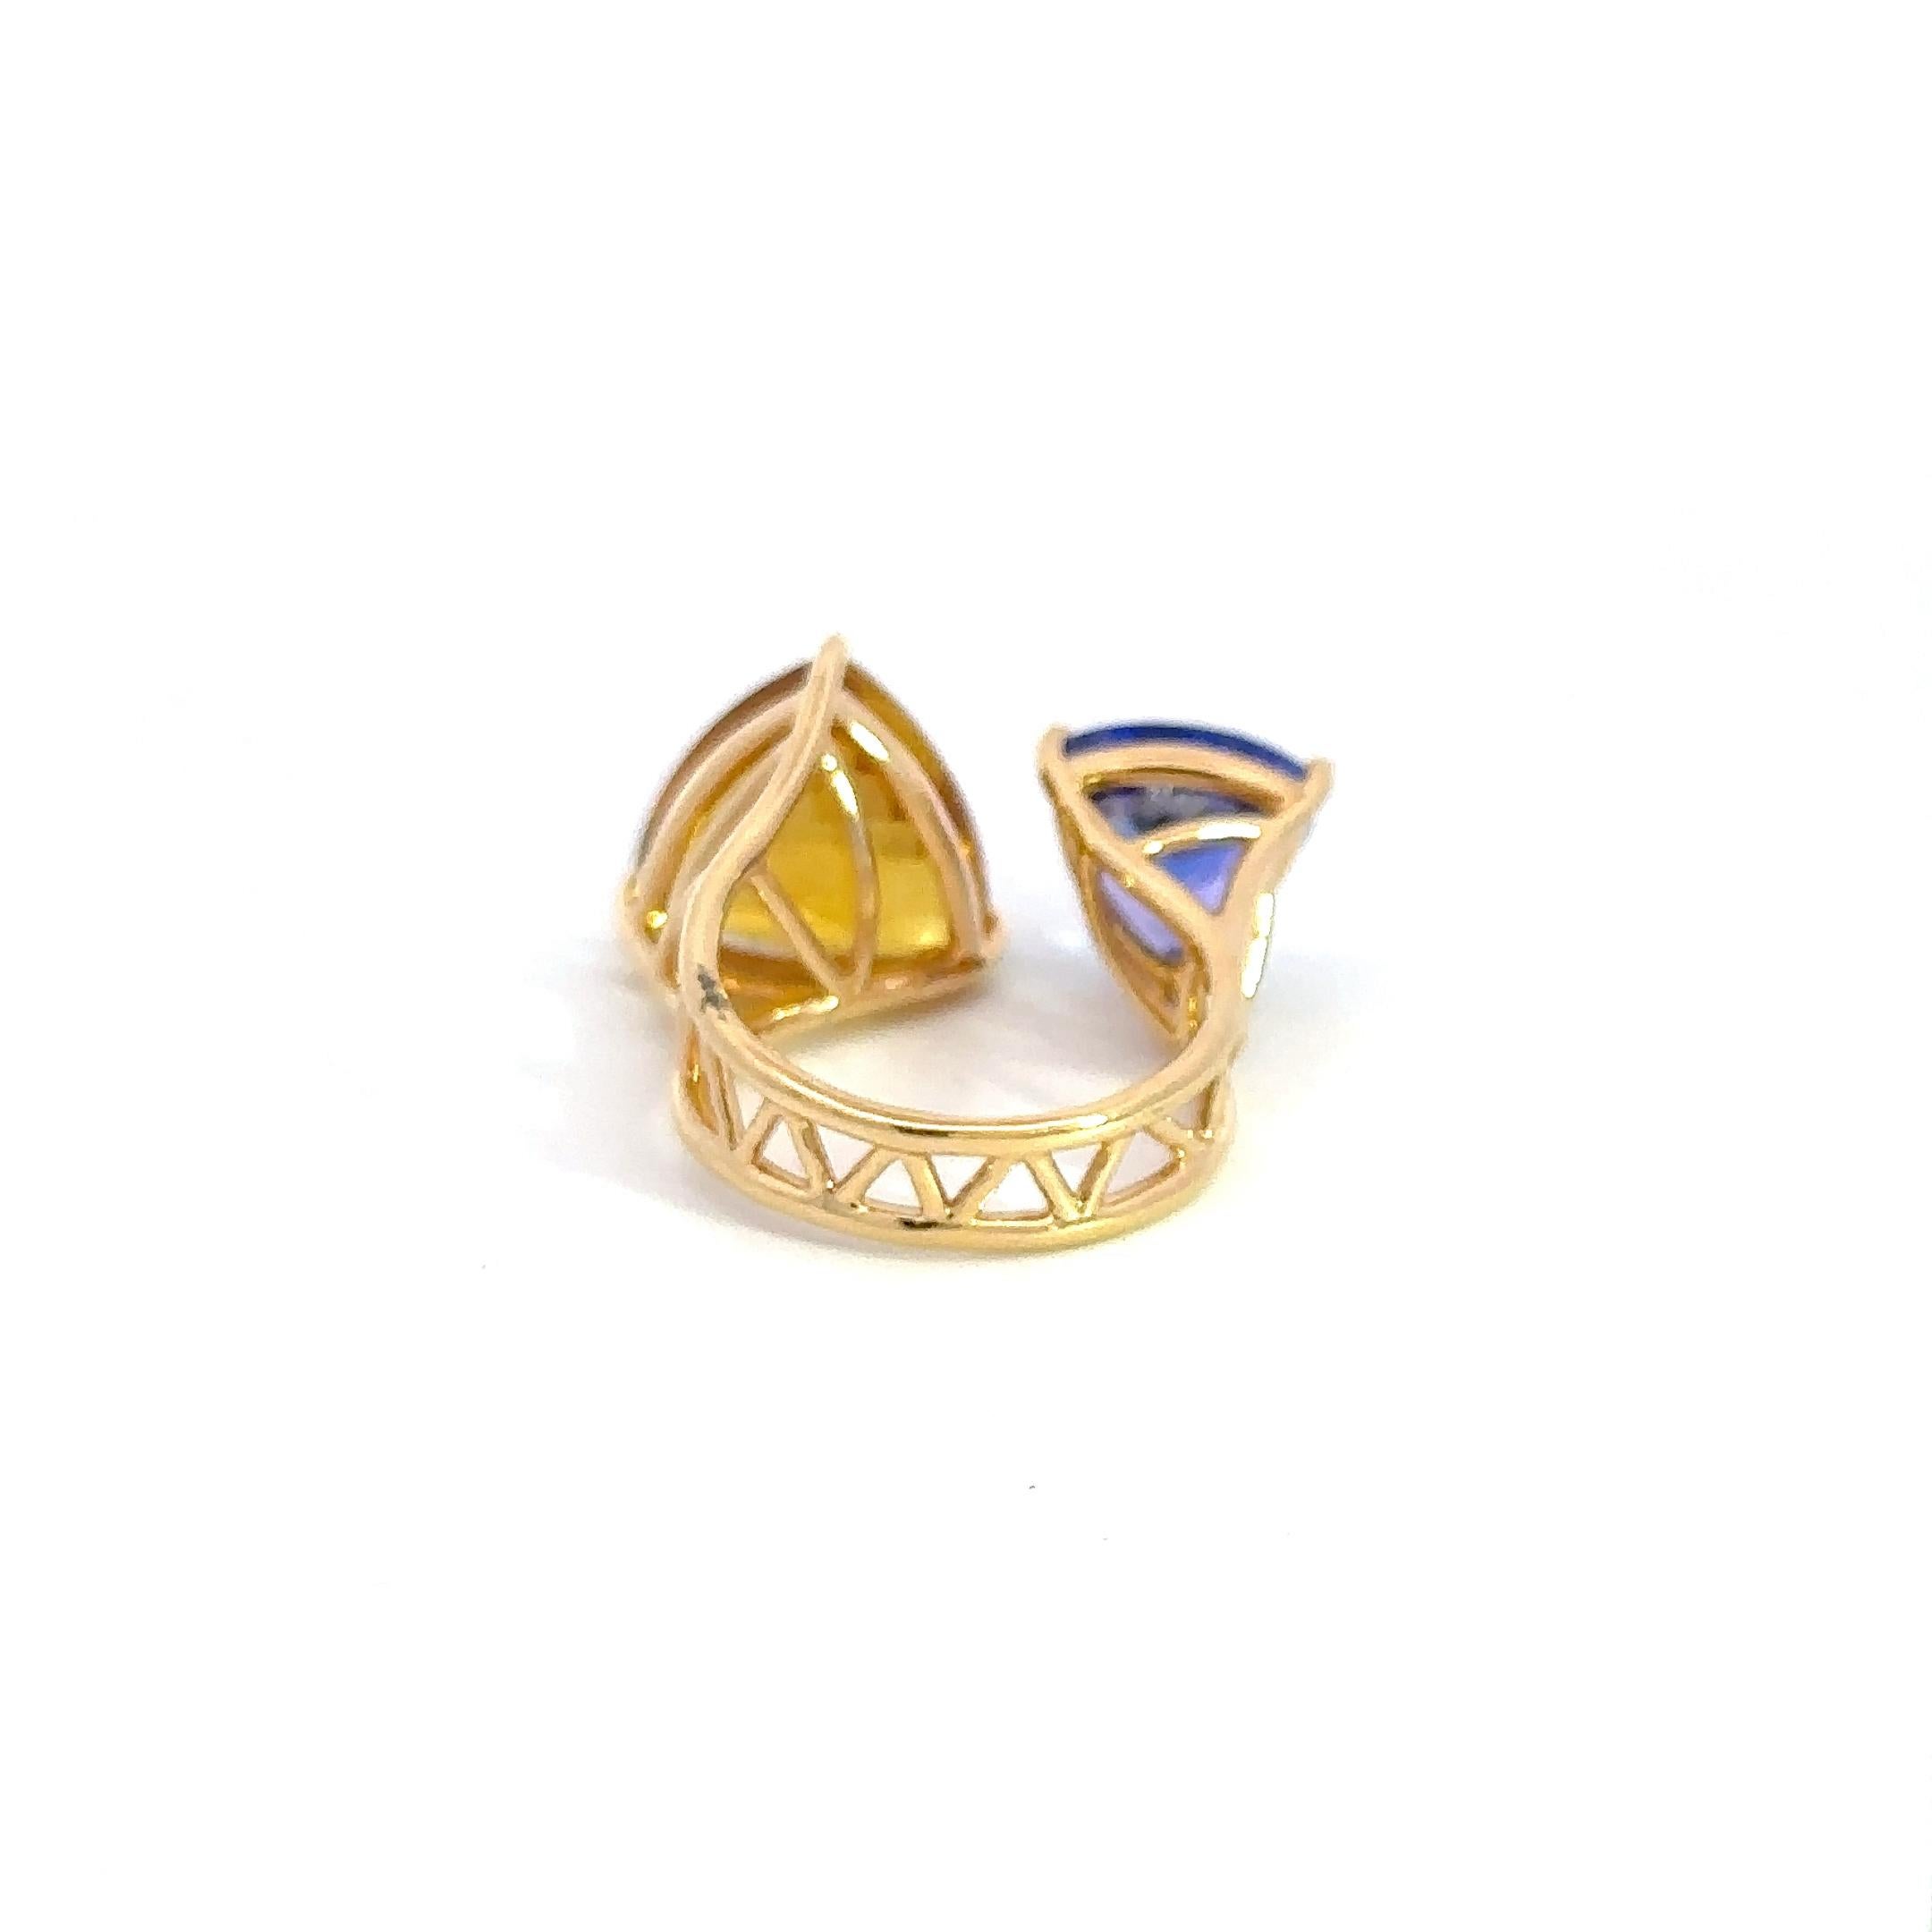 Ring

18K Yellow Gold 

Weight 6,05 grams

Beryl-1/7.63 Cts
Tanzanite -1/3.62 Cts

Size-55

Uncover the elegance of structural beauty with this striking ring, masterfully crafted from6.05 grams of 18k yellow gold. At the heart of this design lies a